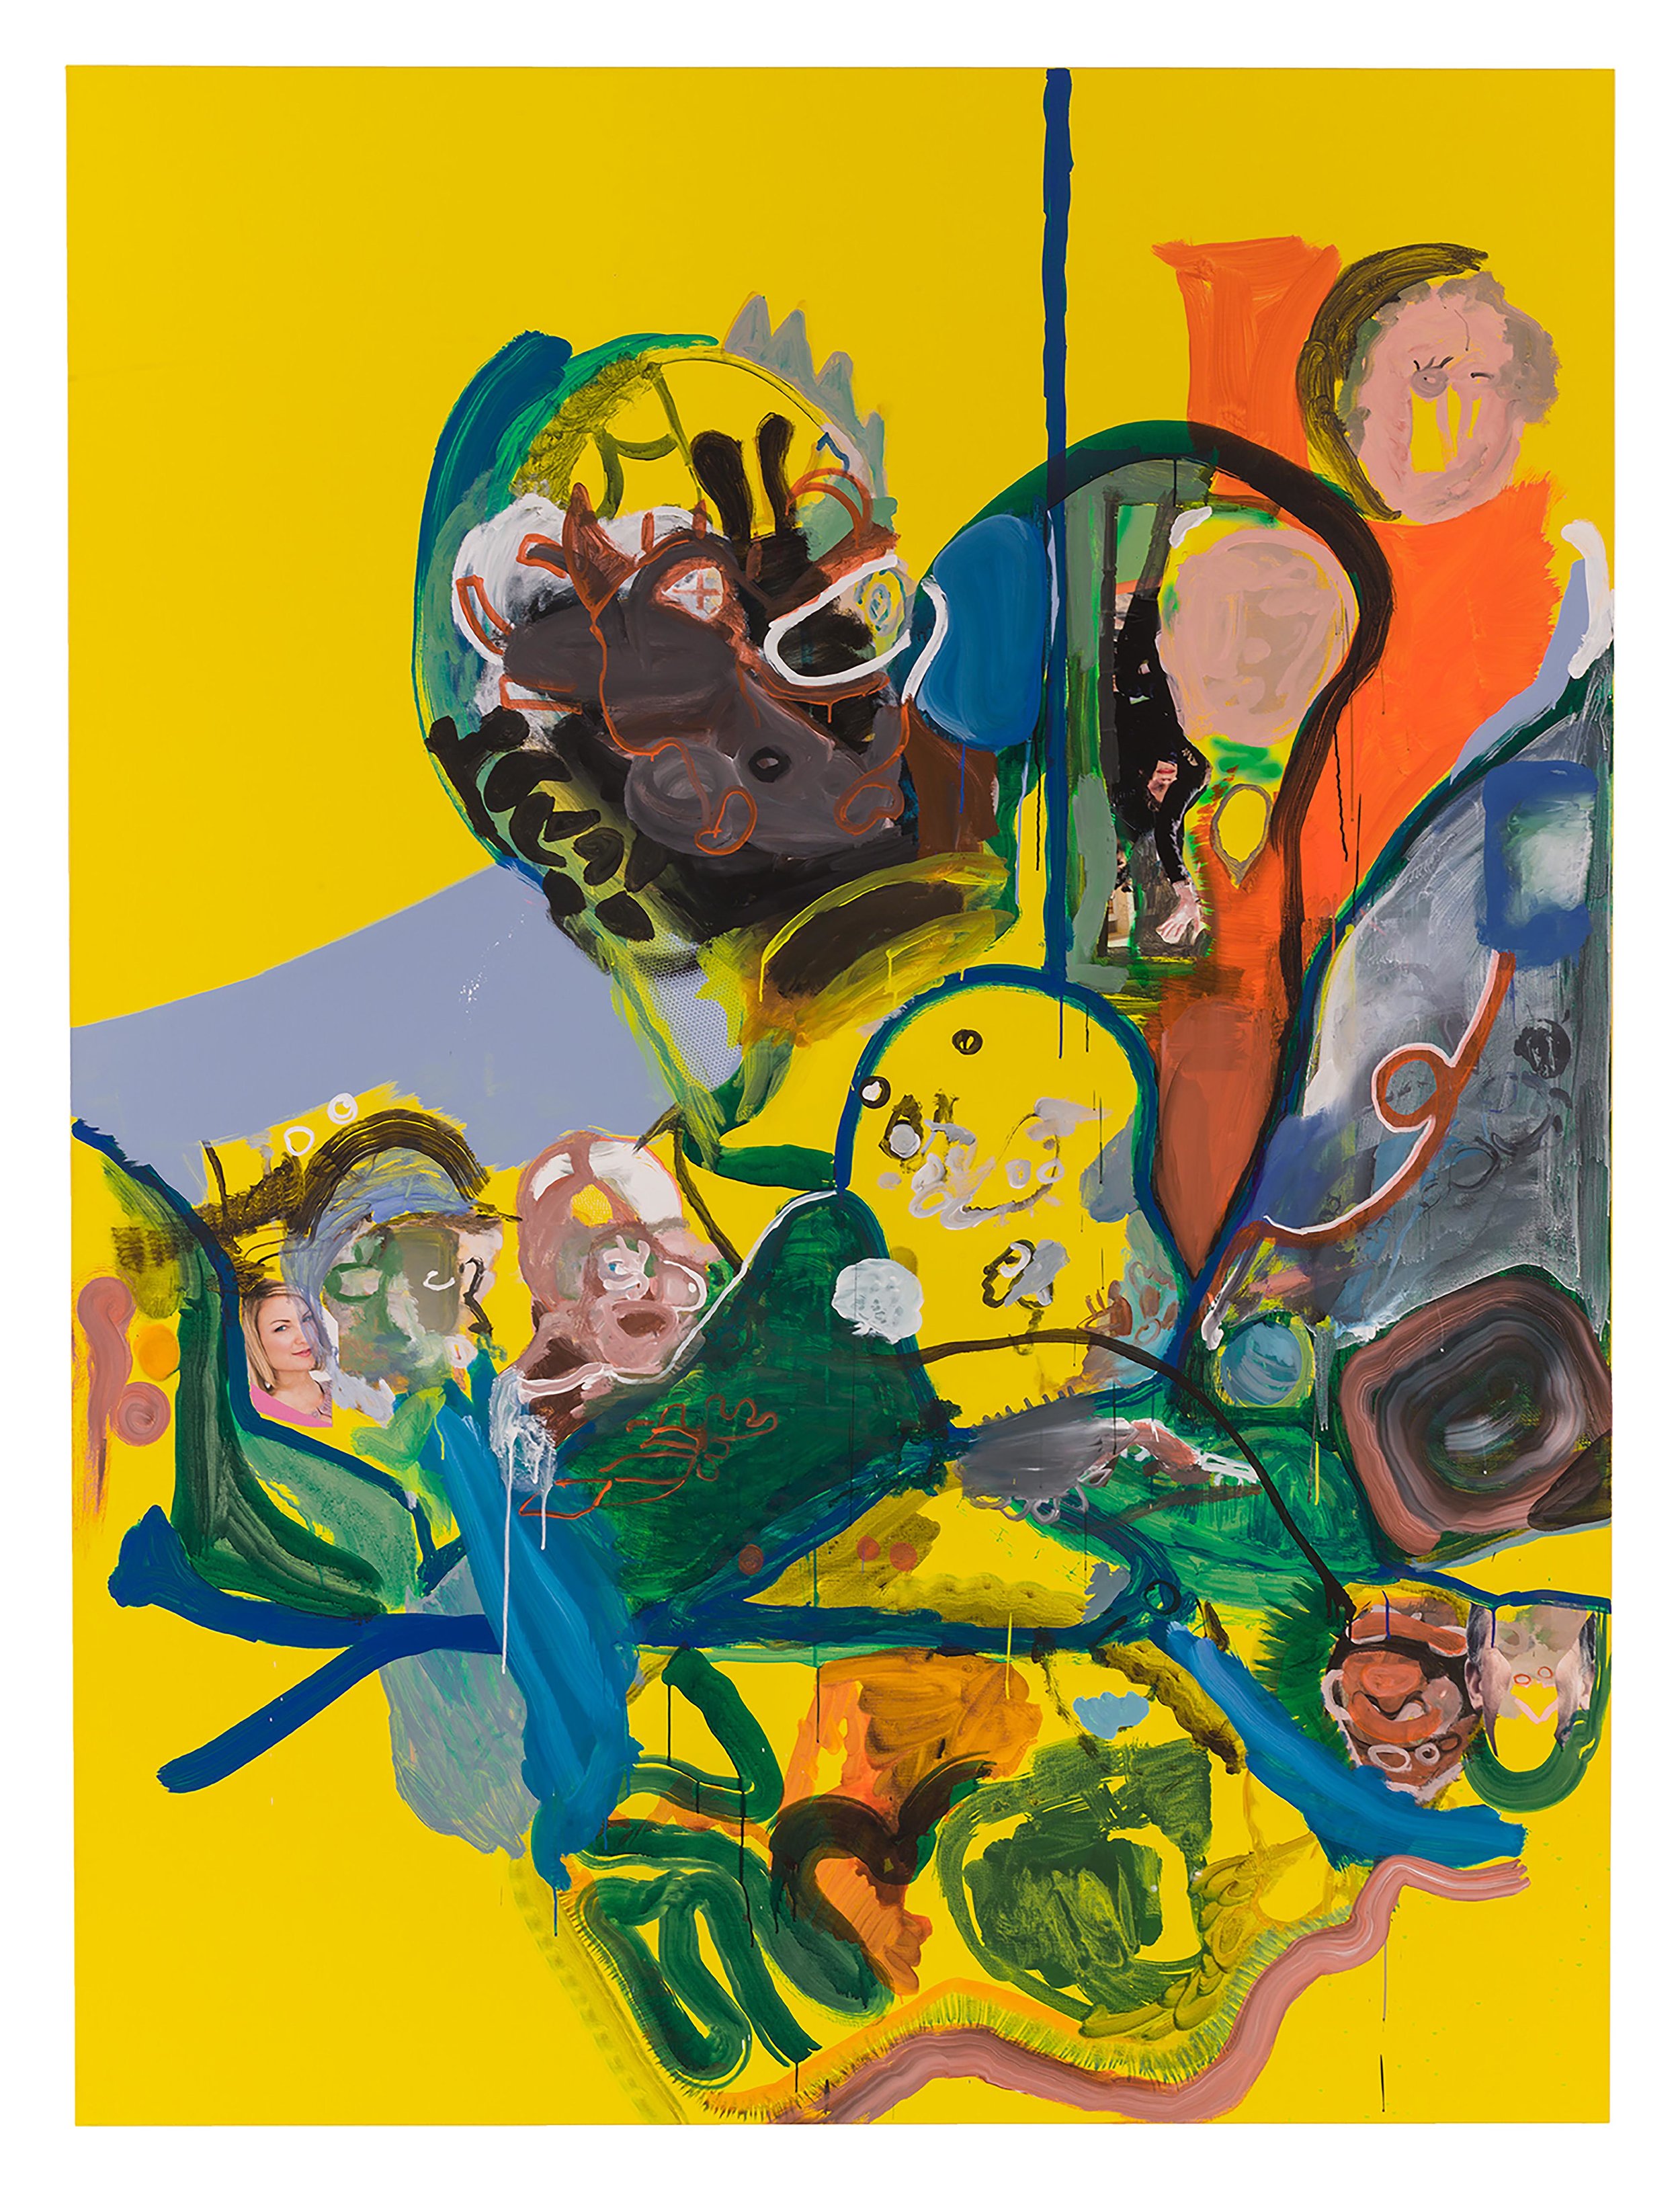  Drew Beattie  Fruit in the Morning &nbsp; 2010 acrylic and collage on canvas 120 x 90 inches 